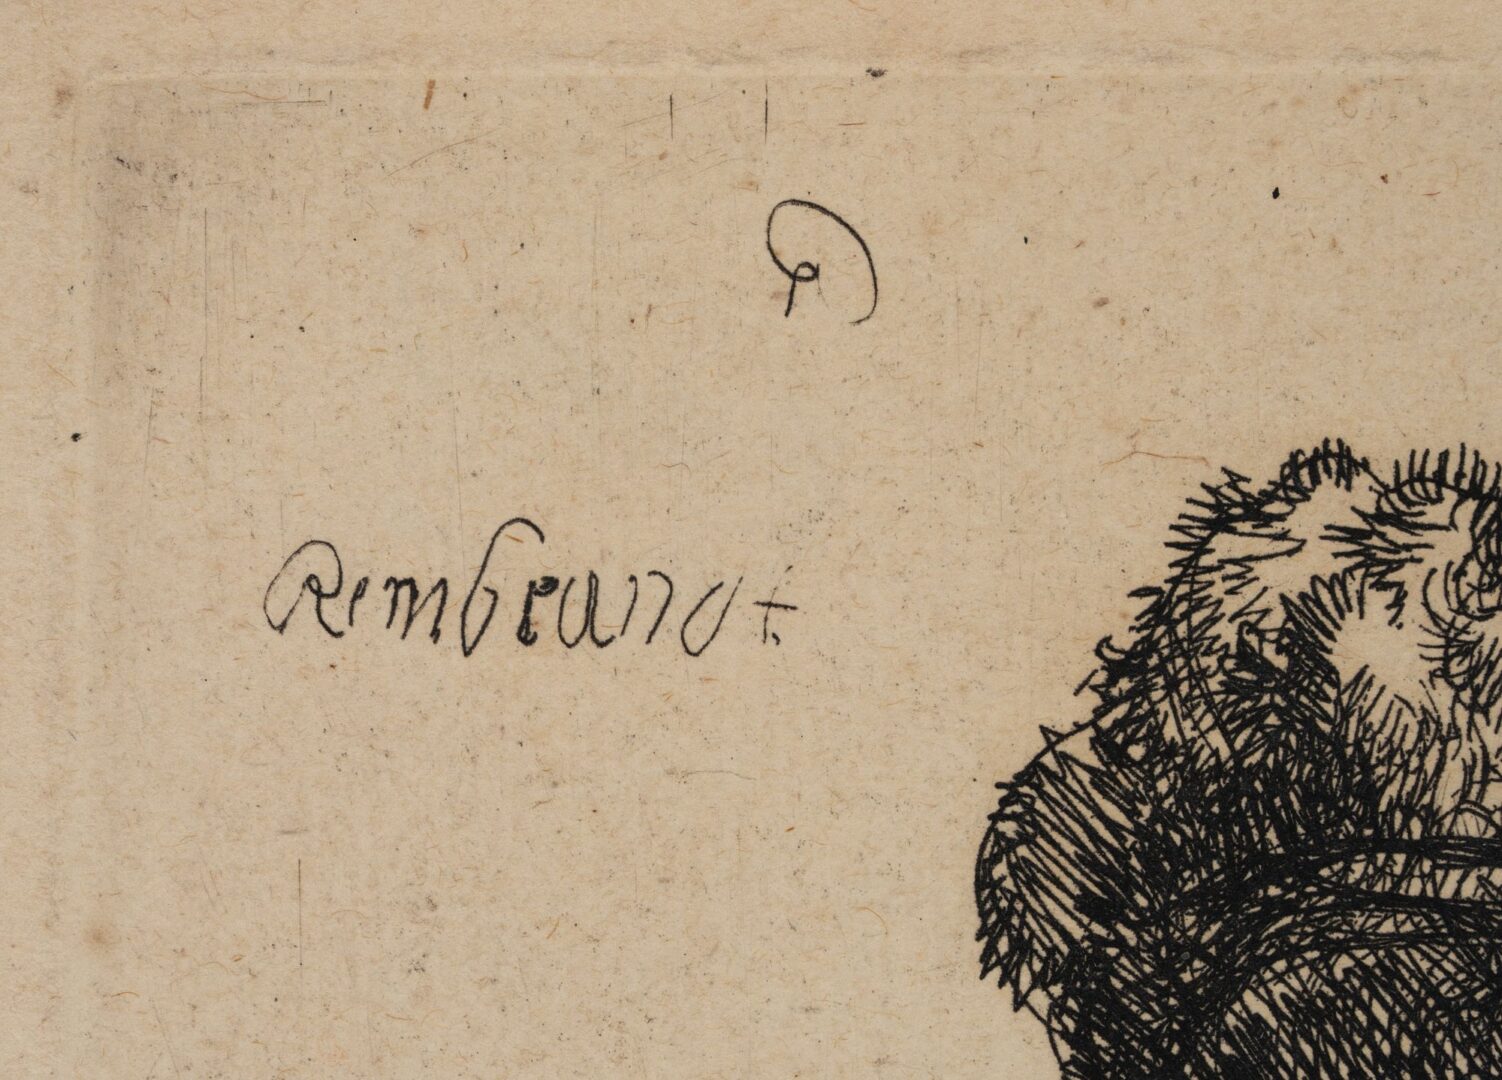 Lot 116: Rembrandt Etching, Old Bearded Man in a High Fur Cap, with Eyes Closed